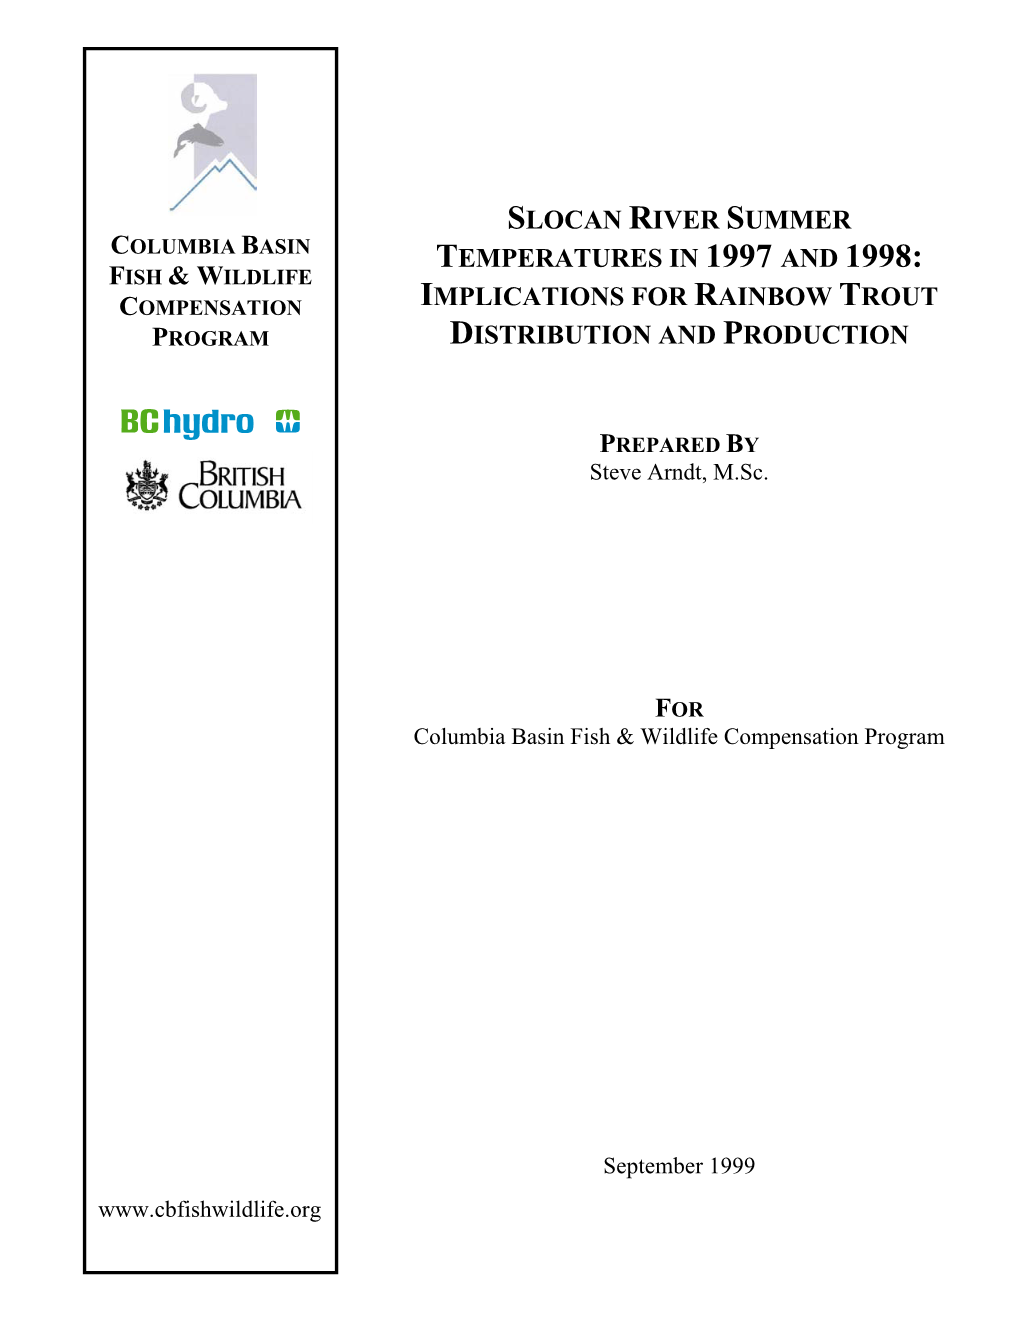 Slocan River Summer Temperatures in 1997 and 1998: Implications for Rainbow Trout Distribution and Production Fish & Wildlif